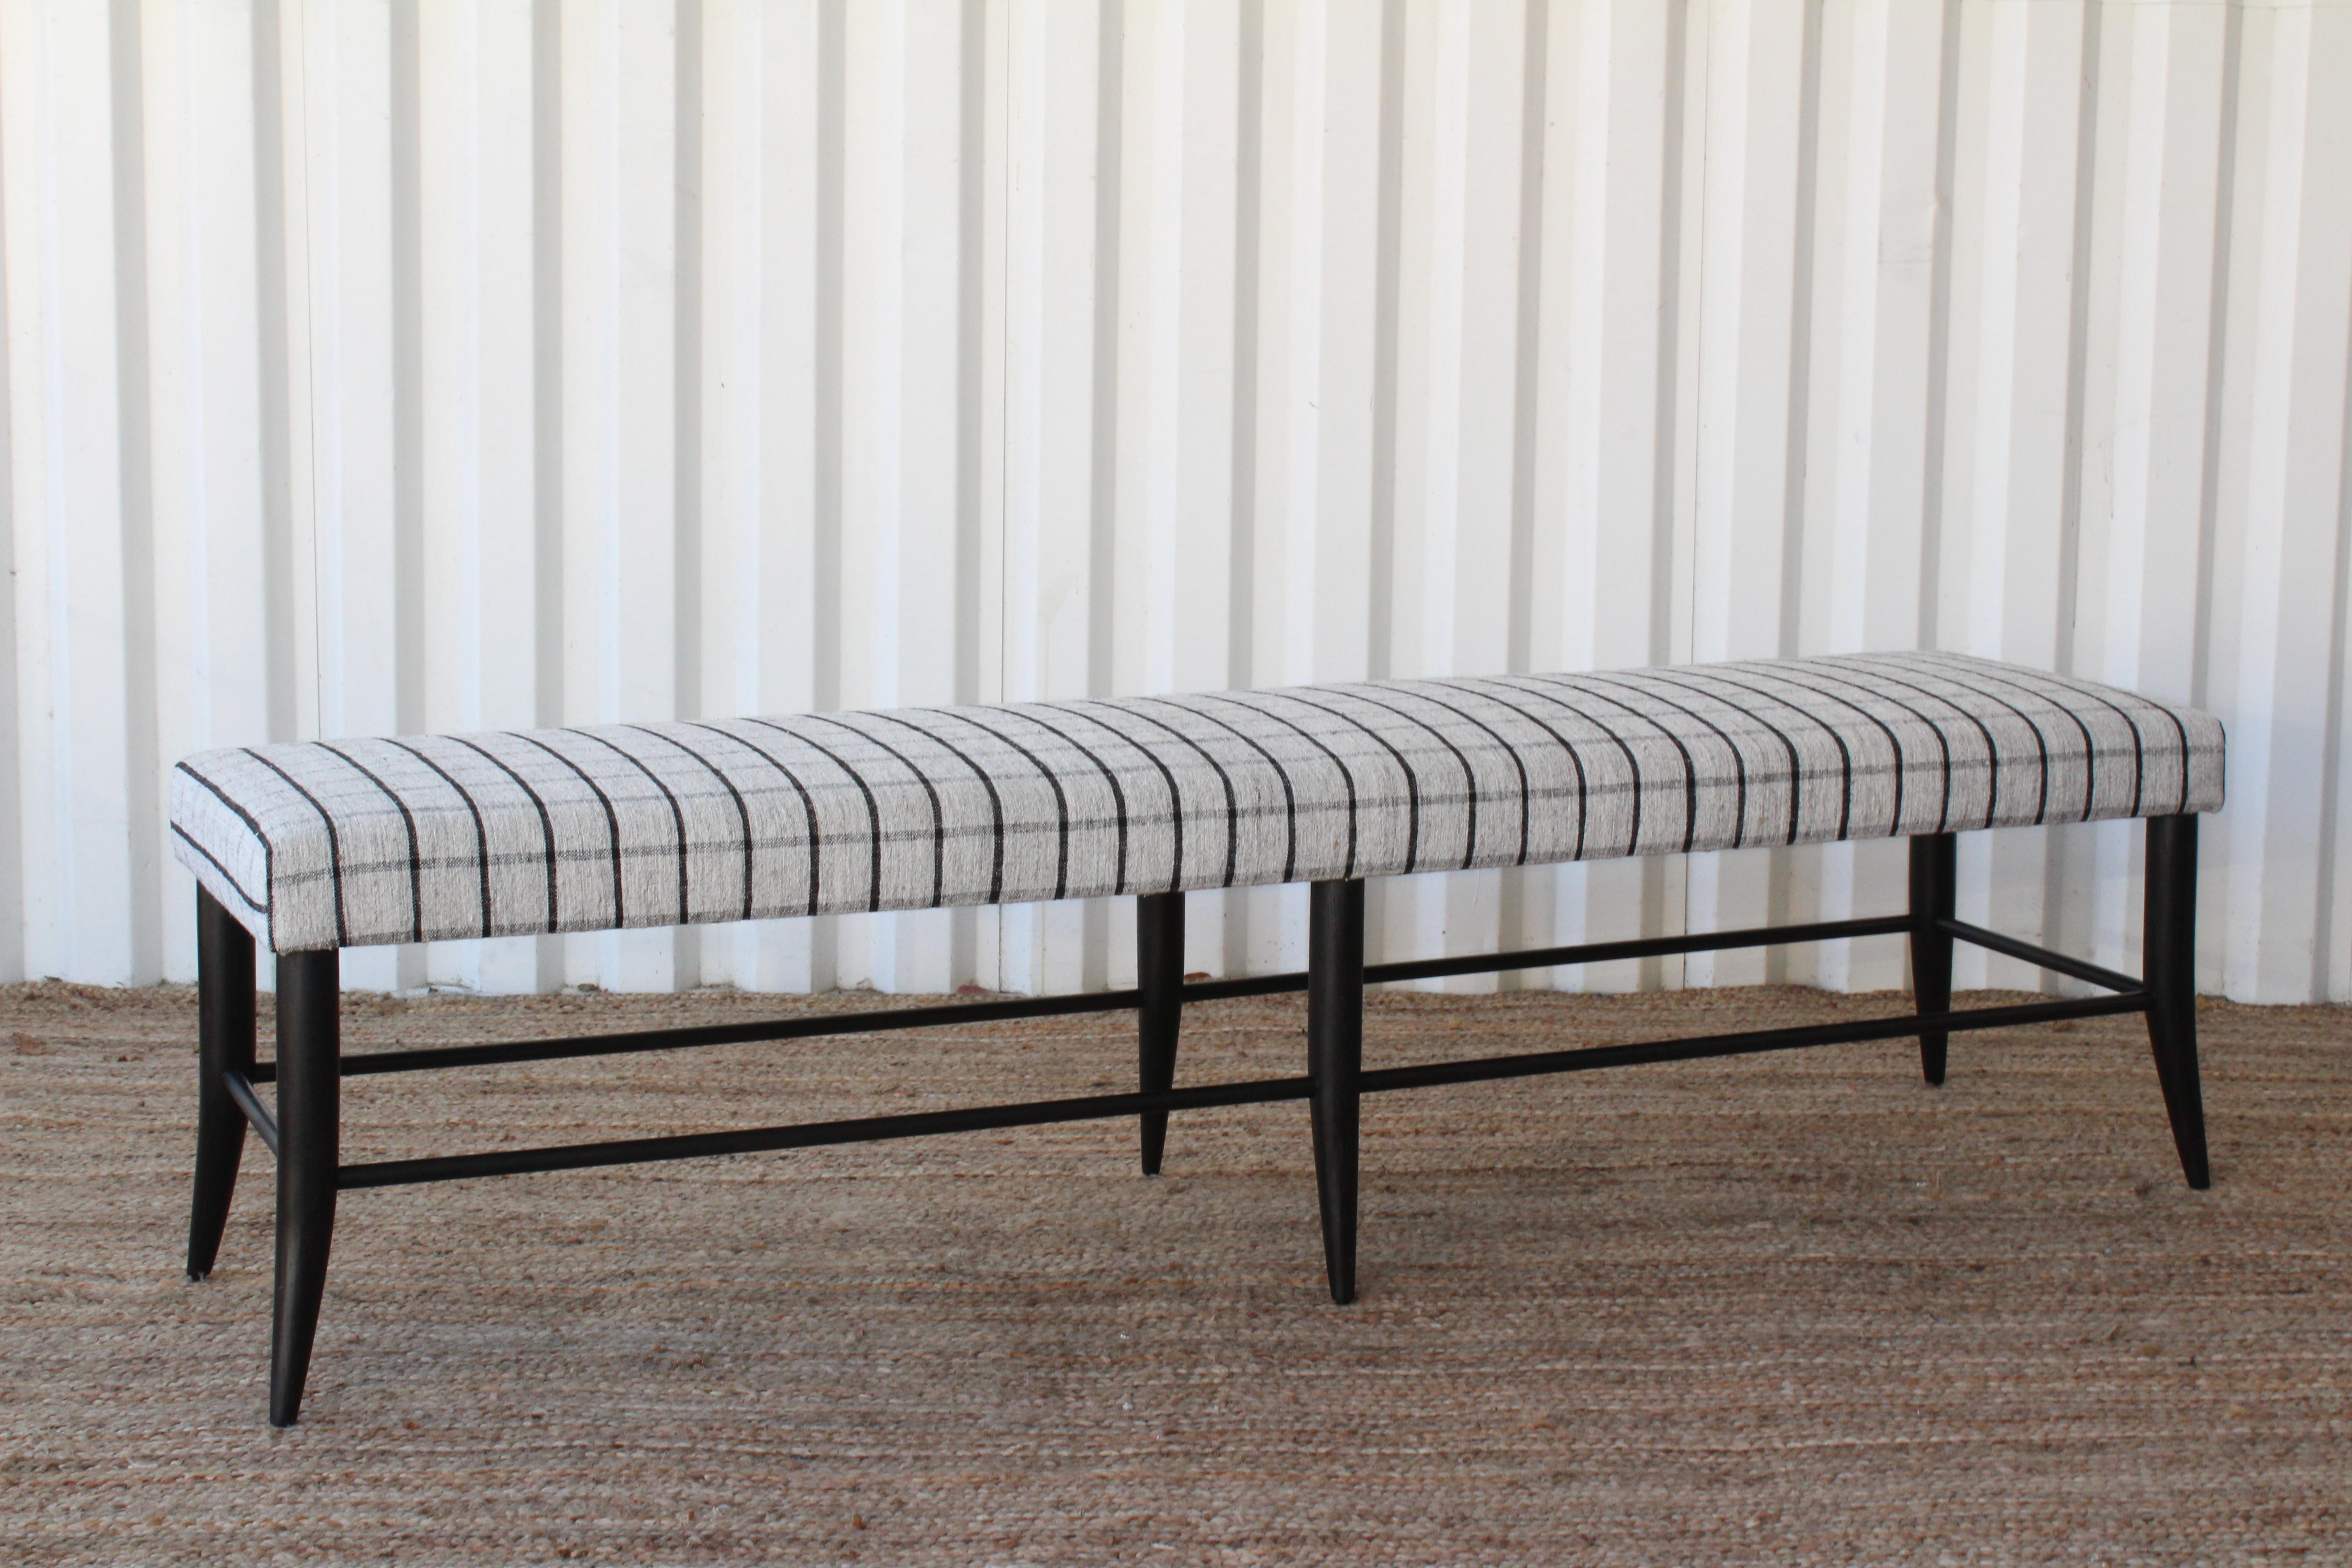 American Custom Croft Bench Upholstered in a Vintage Wool Textile